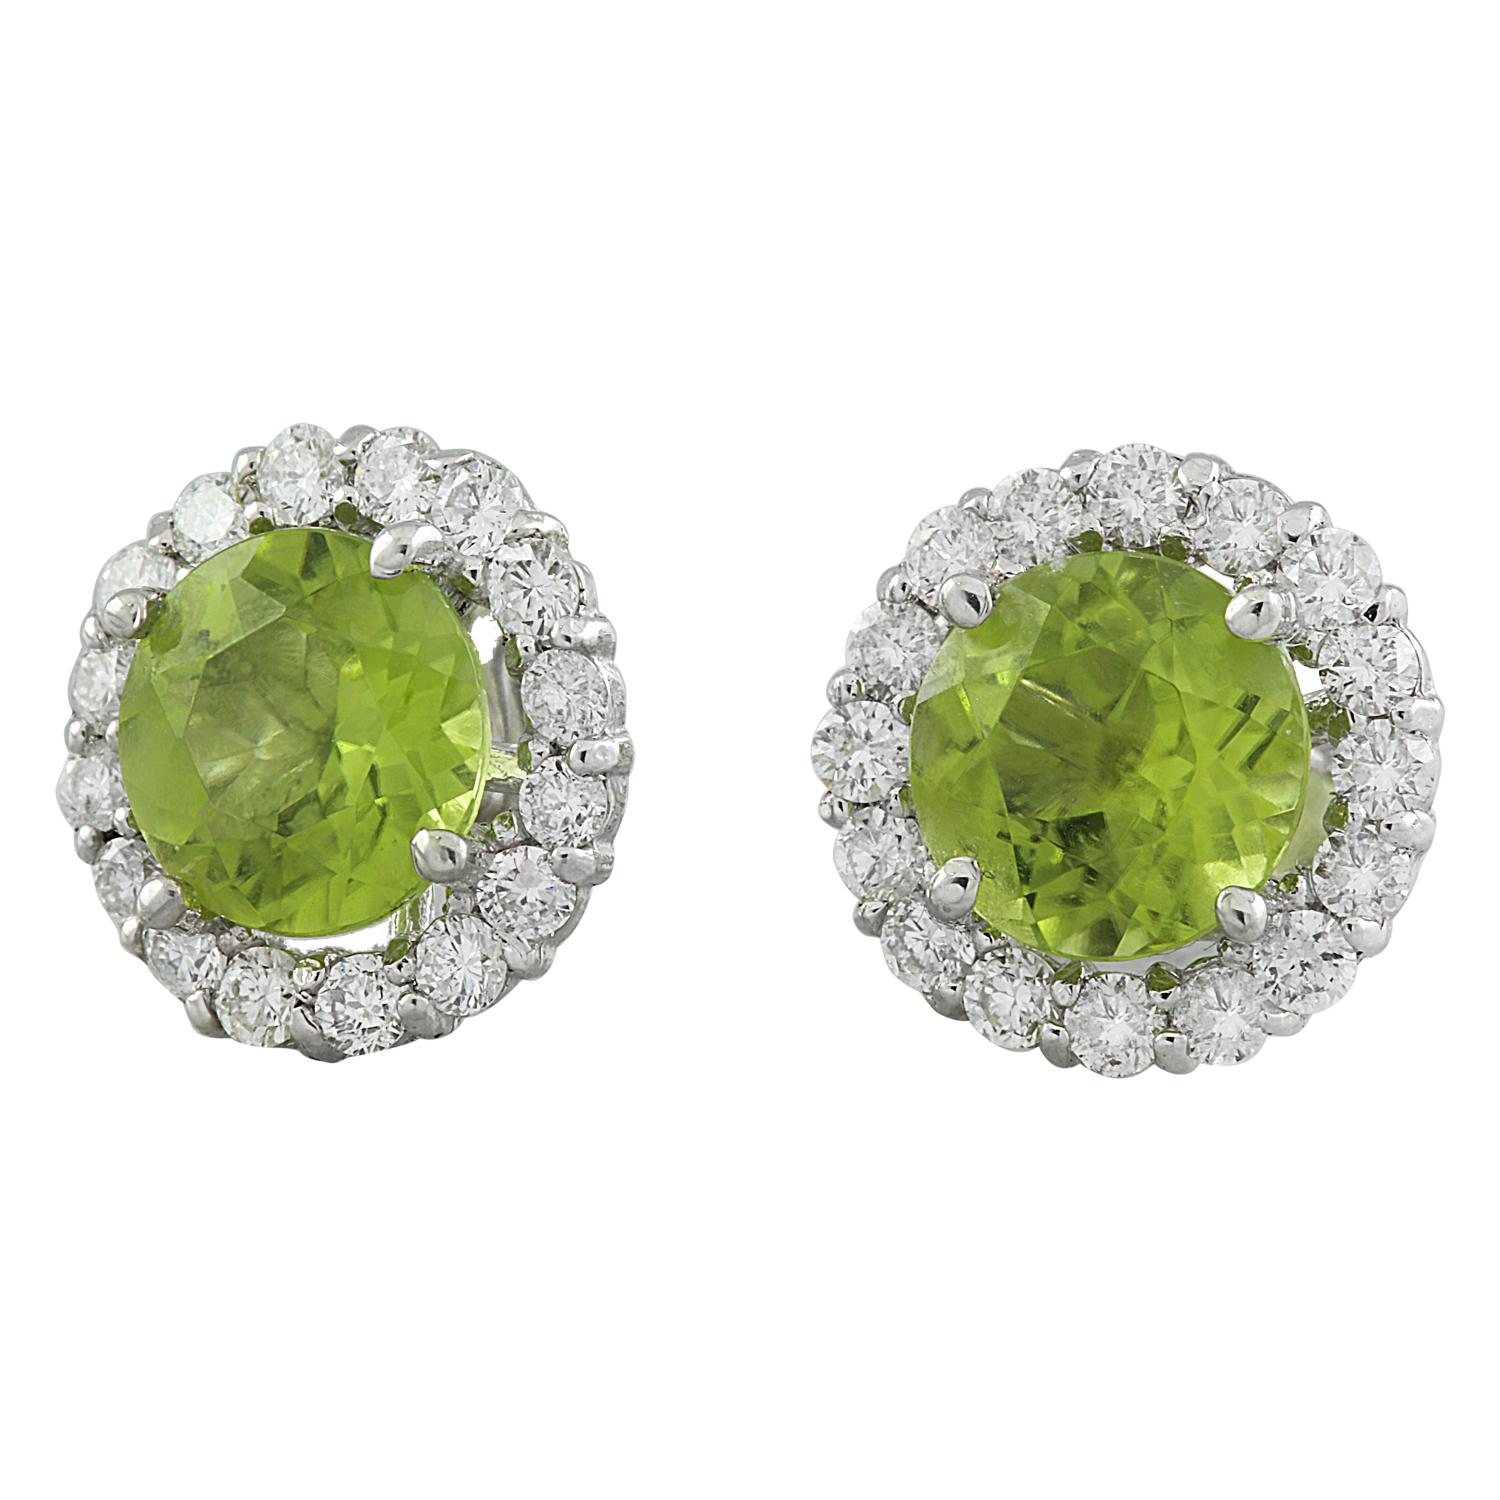 3.65 Carat Natural Peridot 14 Karat Solid White Gold Diamond Earrings
Stamped: 14K 
Total Earrings Weight: 1.5 Grams 
Garnet Weight: 3.00 Carat (7.00x7.00 Millimeters)  
Quantity: 2
Shape: Round
Treatment: Heating
Color: Green
Diamond Weight: 0.65